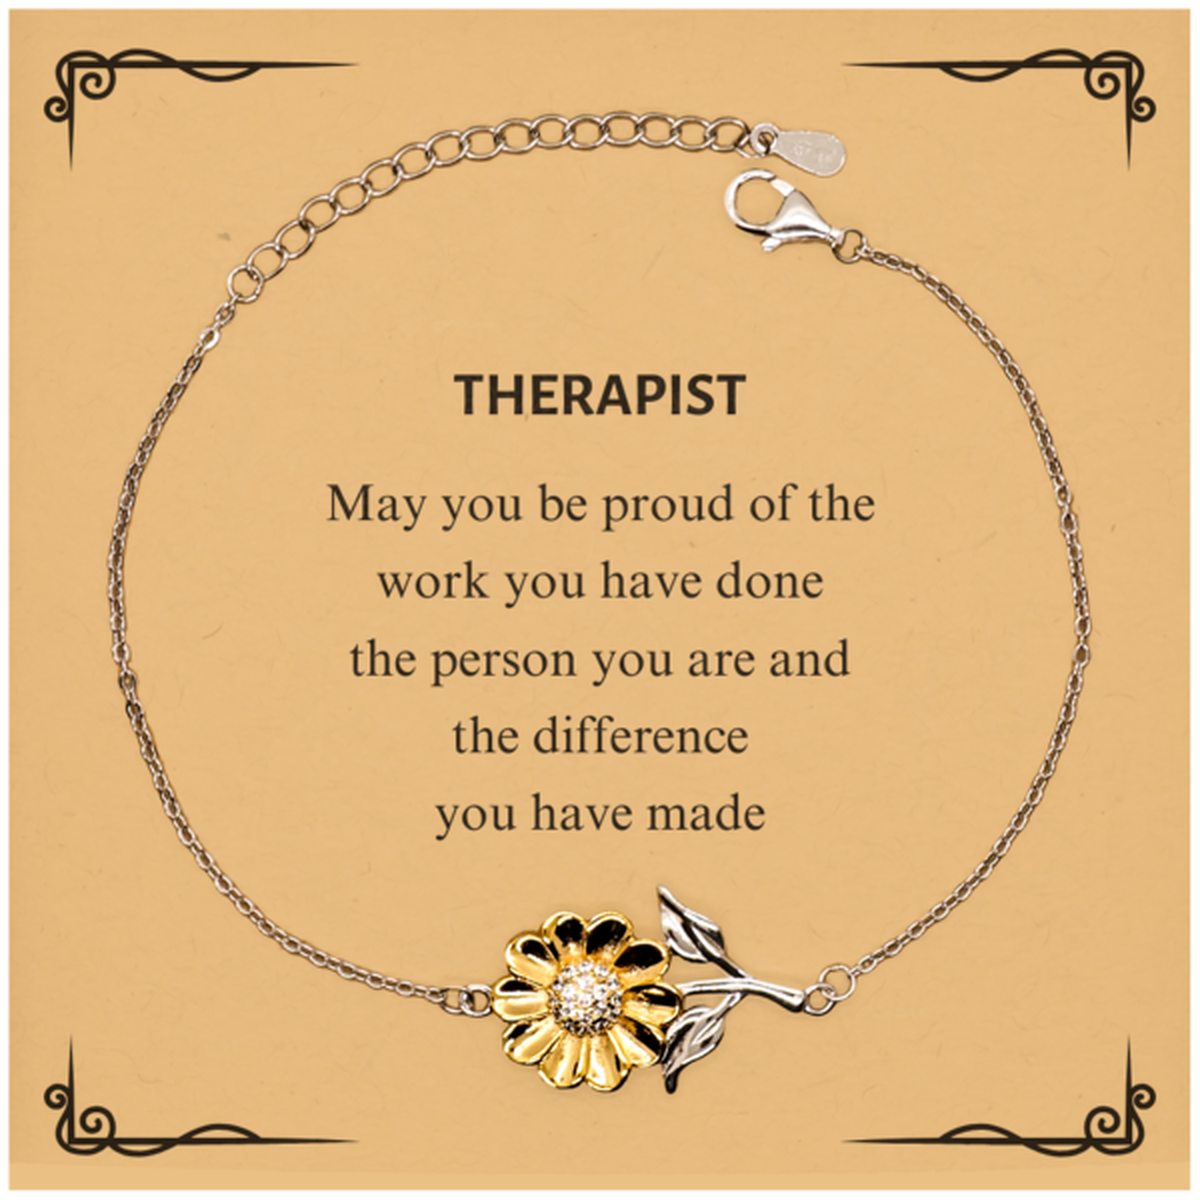 Therapist May you be proud of the work you have done, Retirement Therapist Sunflower Bracelet for Colleague Appreciation Gifts Amazing for Therapist